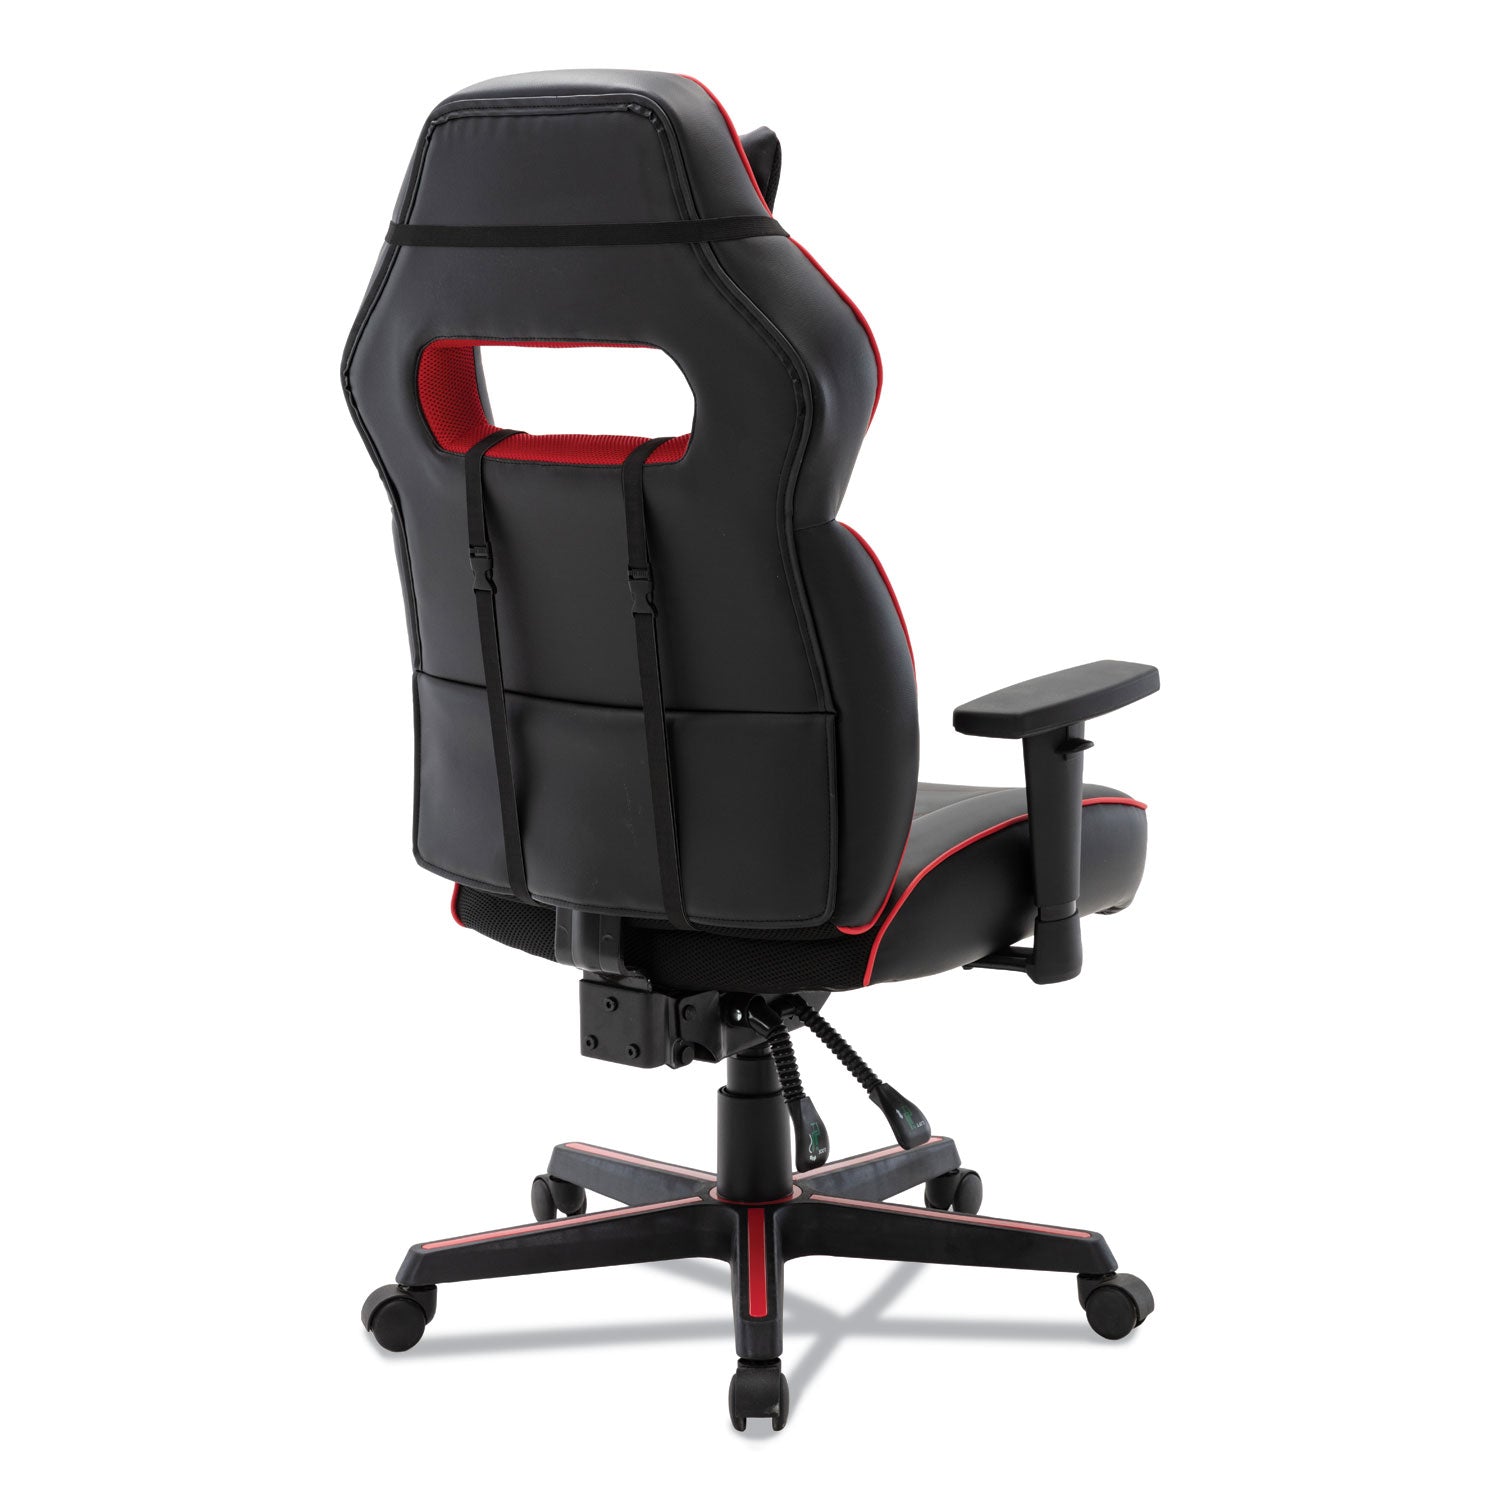 racing-style-ergonomic-gaming-chair-supports-275-lb-1591-to-198-seat-height-black-red-trim-seat-back-black-red-base_alegm4136 - 6